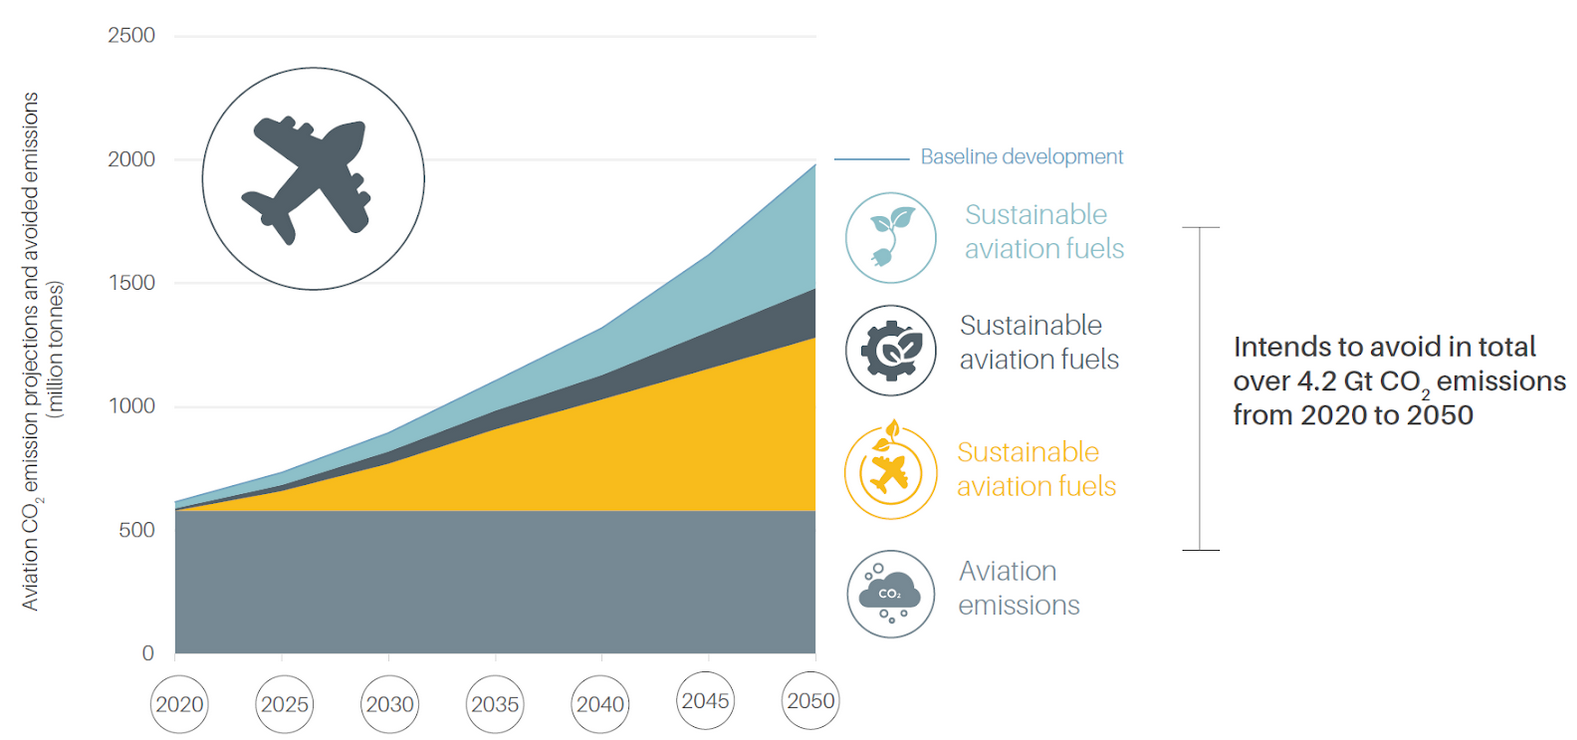 Aviation CO2 emission projections and potential greenhouse gas reductions to 2050